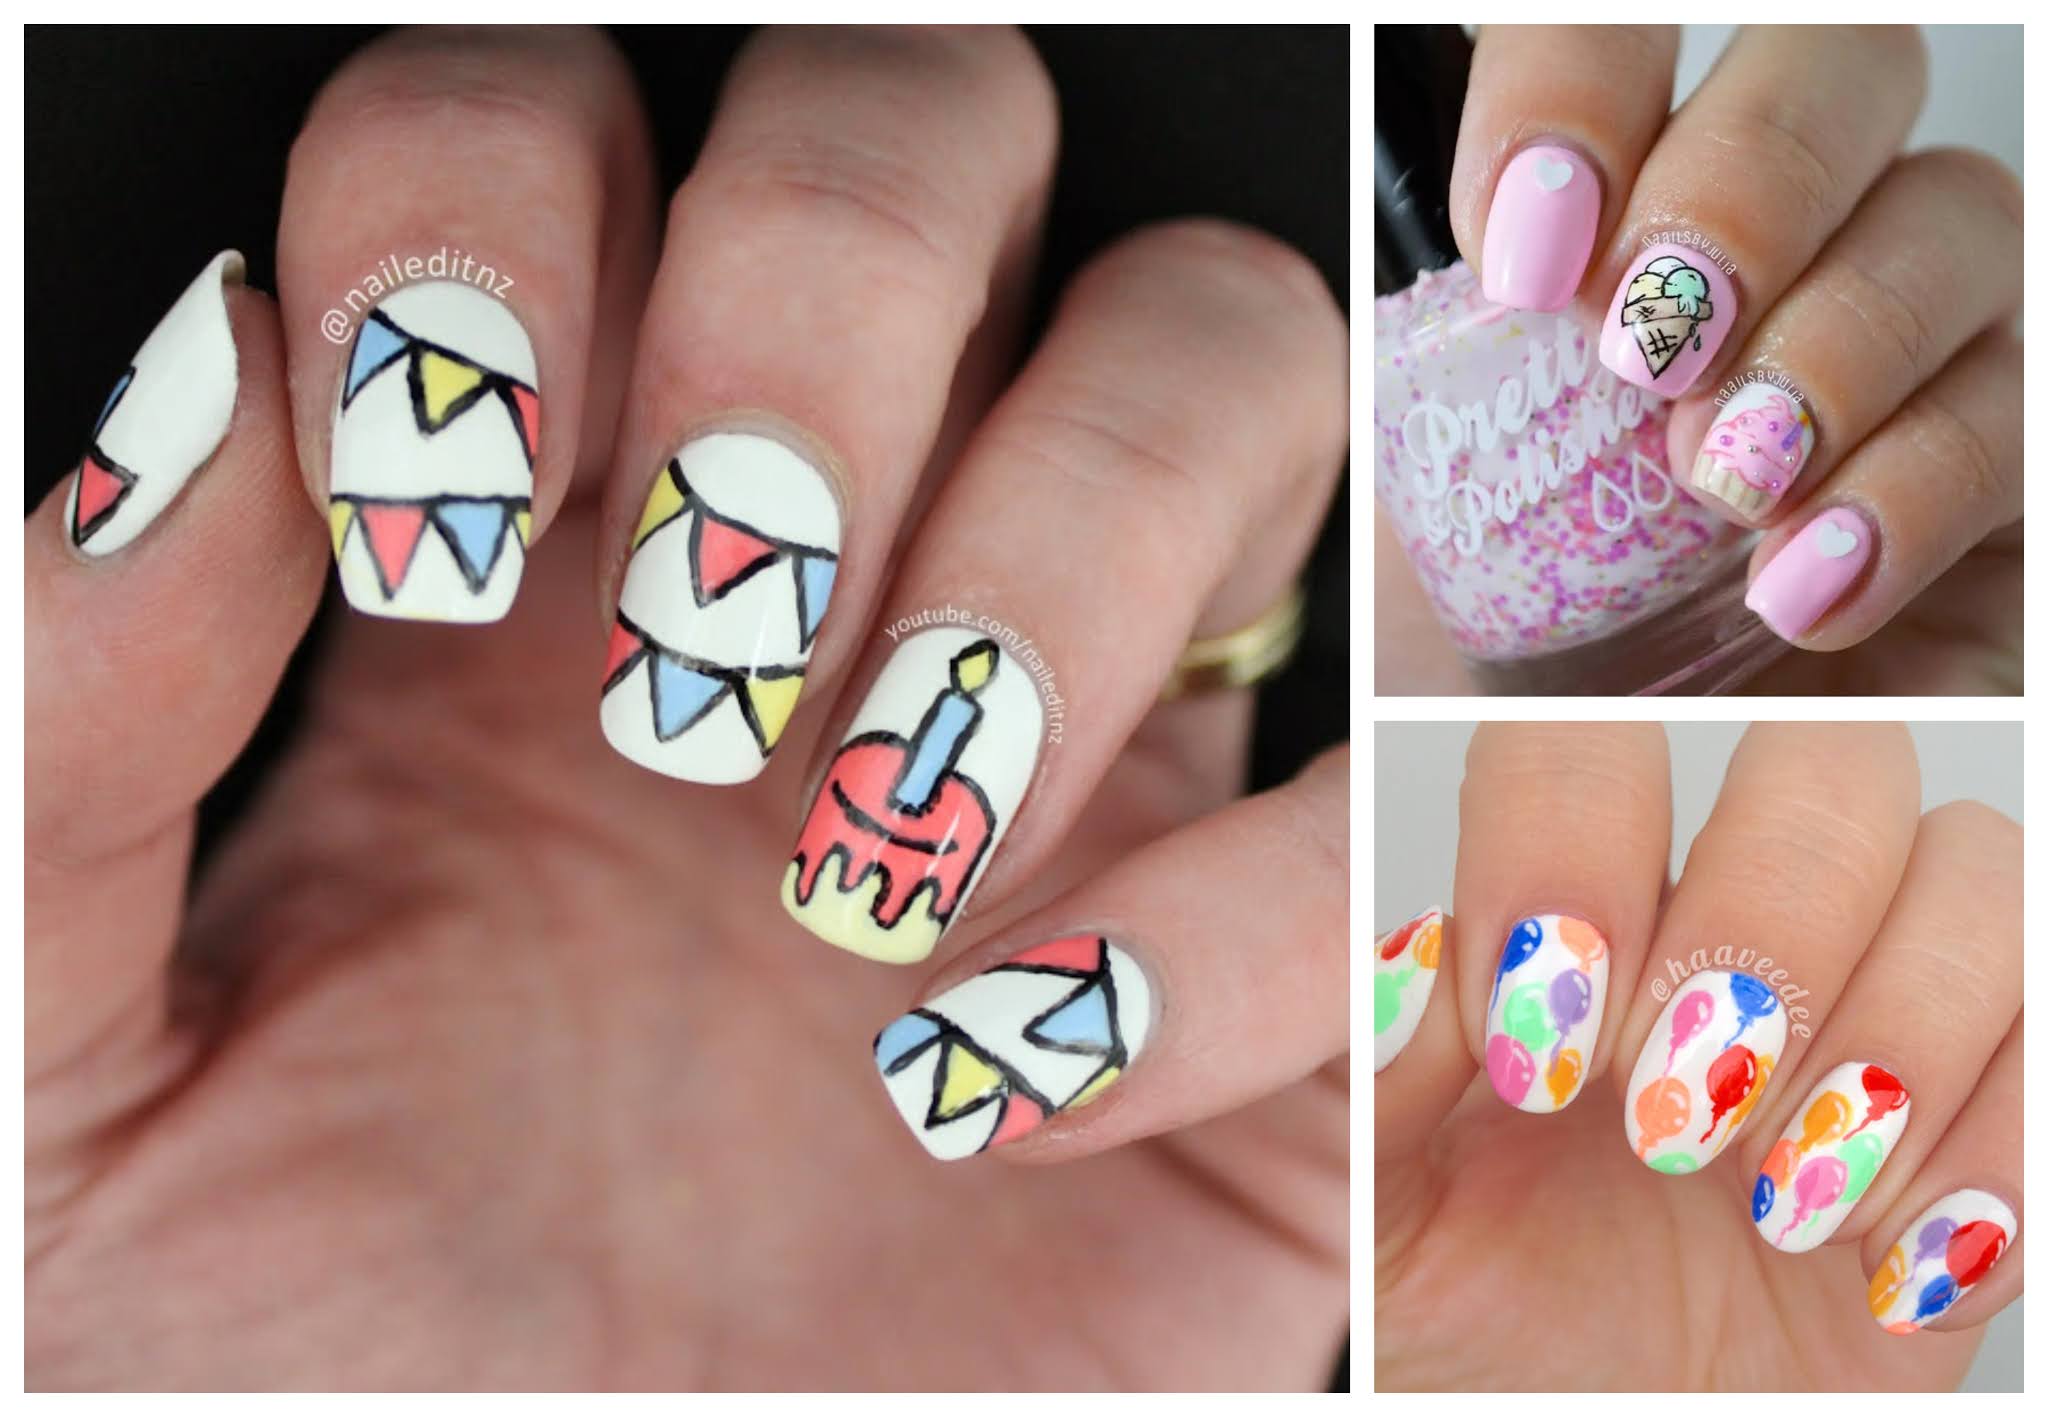 5. "Festive Nail Designs on Tumblr" - wide 6